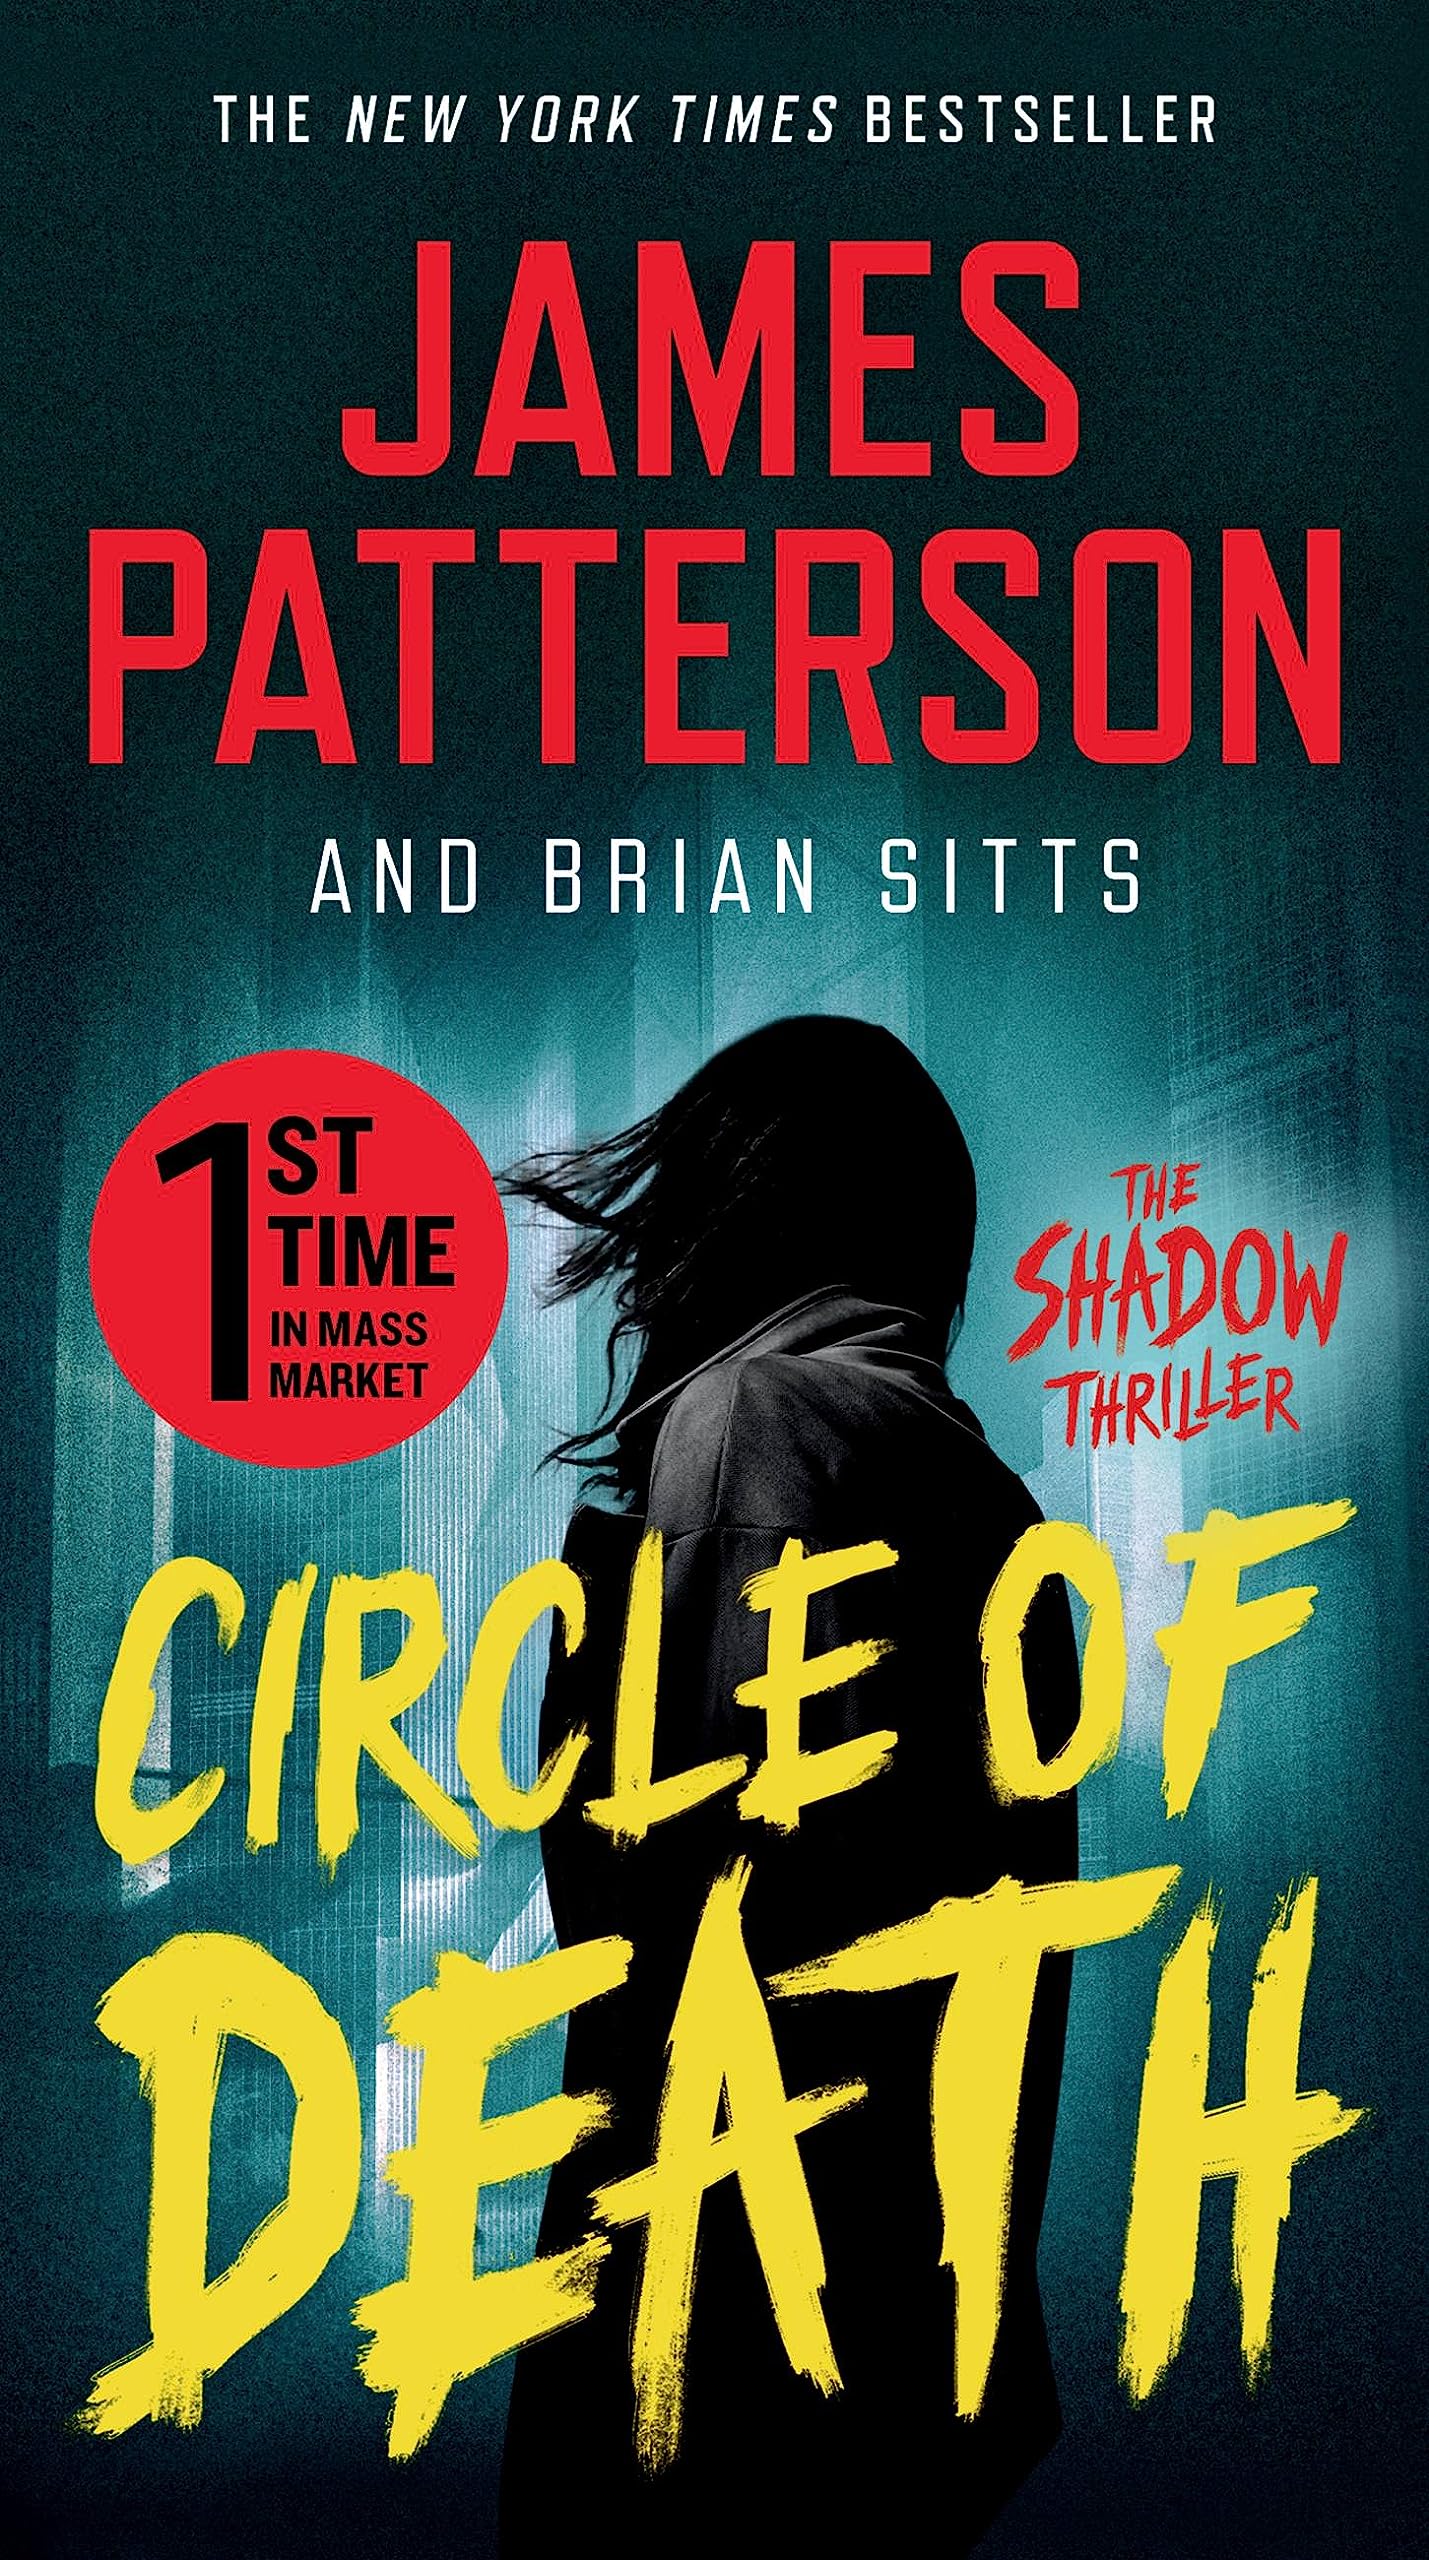 Circle of Death: A Shadow Thriller - 9605